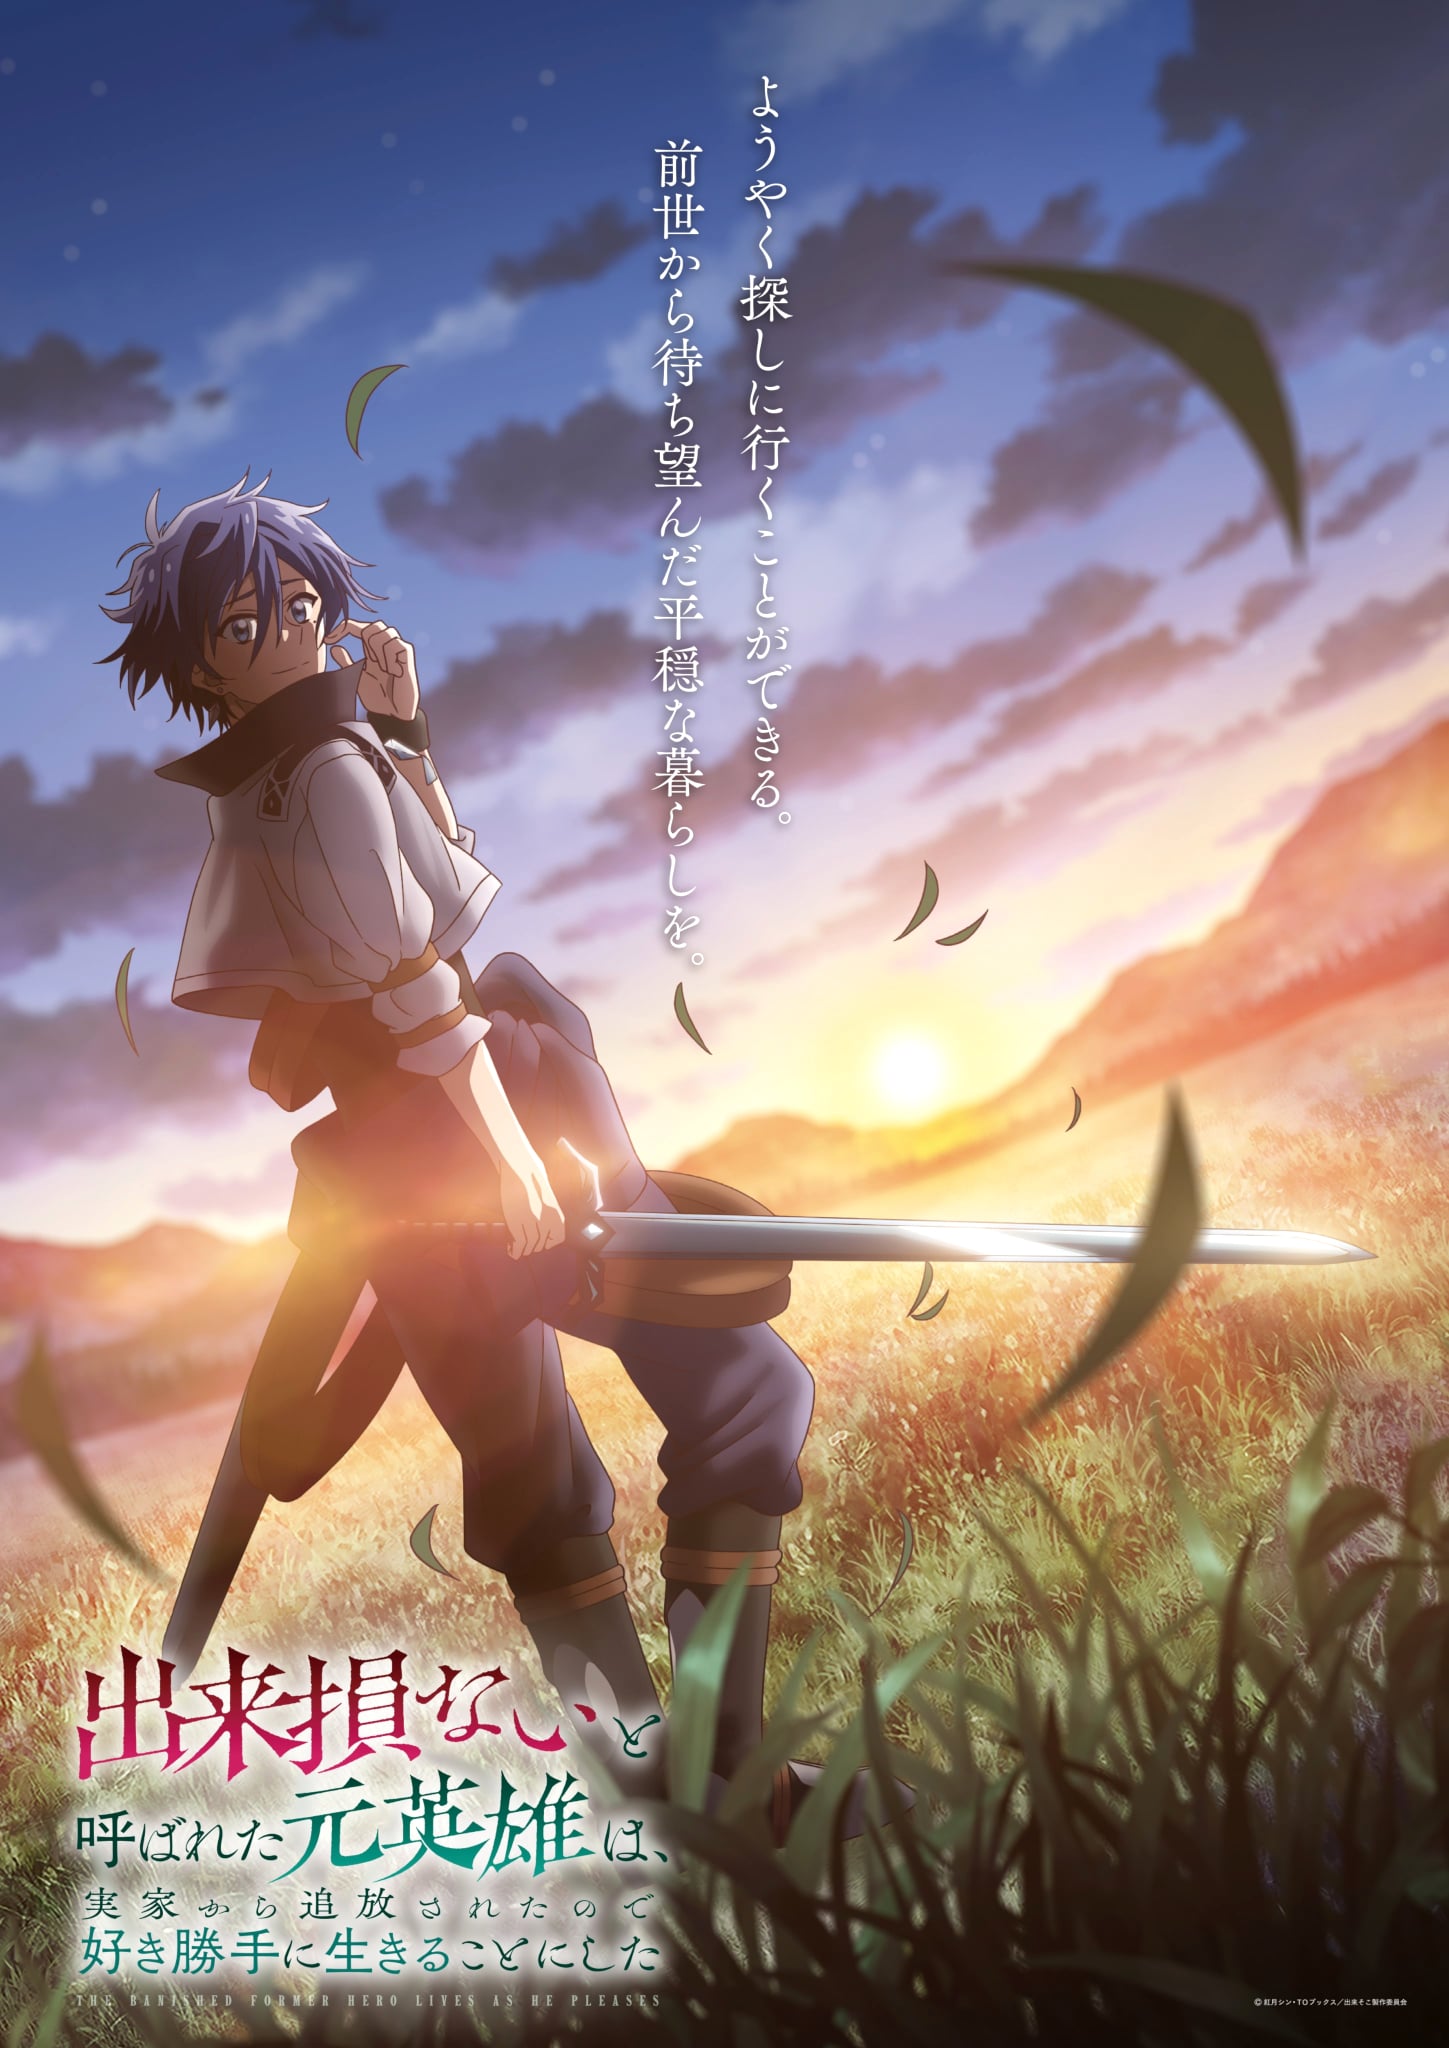 Return Of The Former Hero The Banished Former Hero Lives as He Pleases (anime)